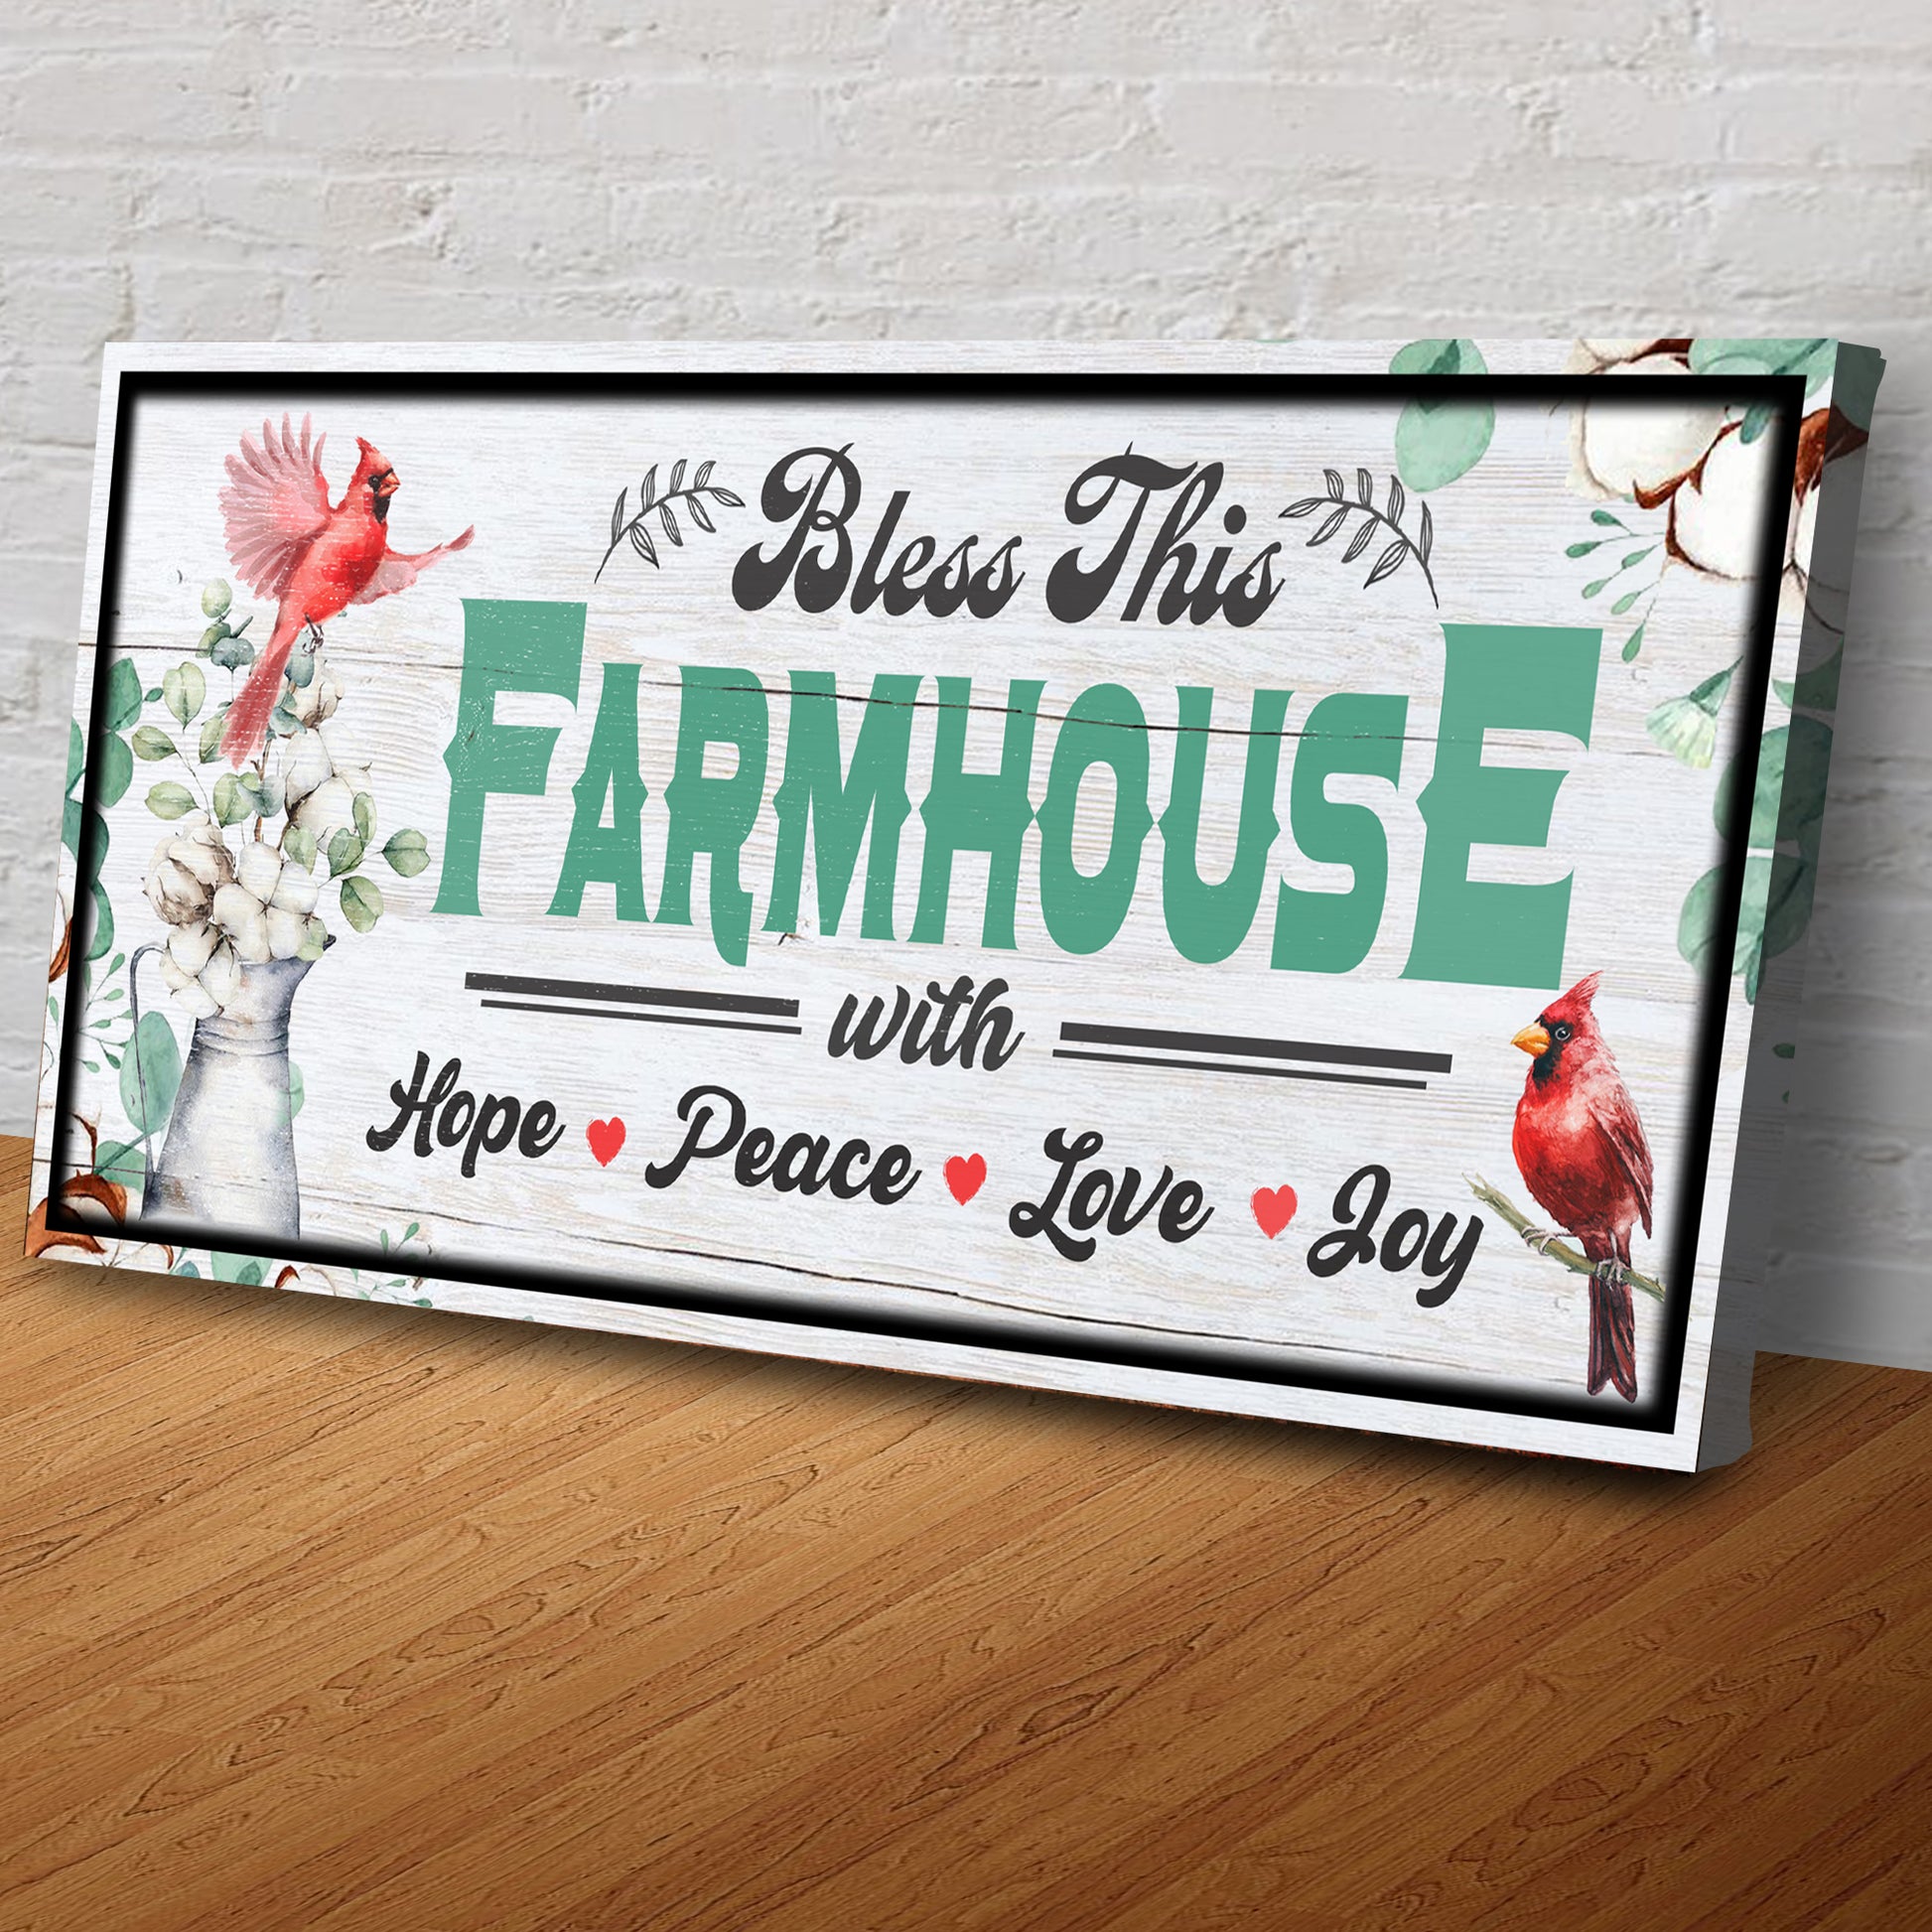 Bless this Farmhouse with Hope, Peace, Love, Joy (Ready to hang)  - Wall Art Image by Tailored Canvases